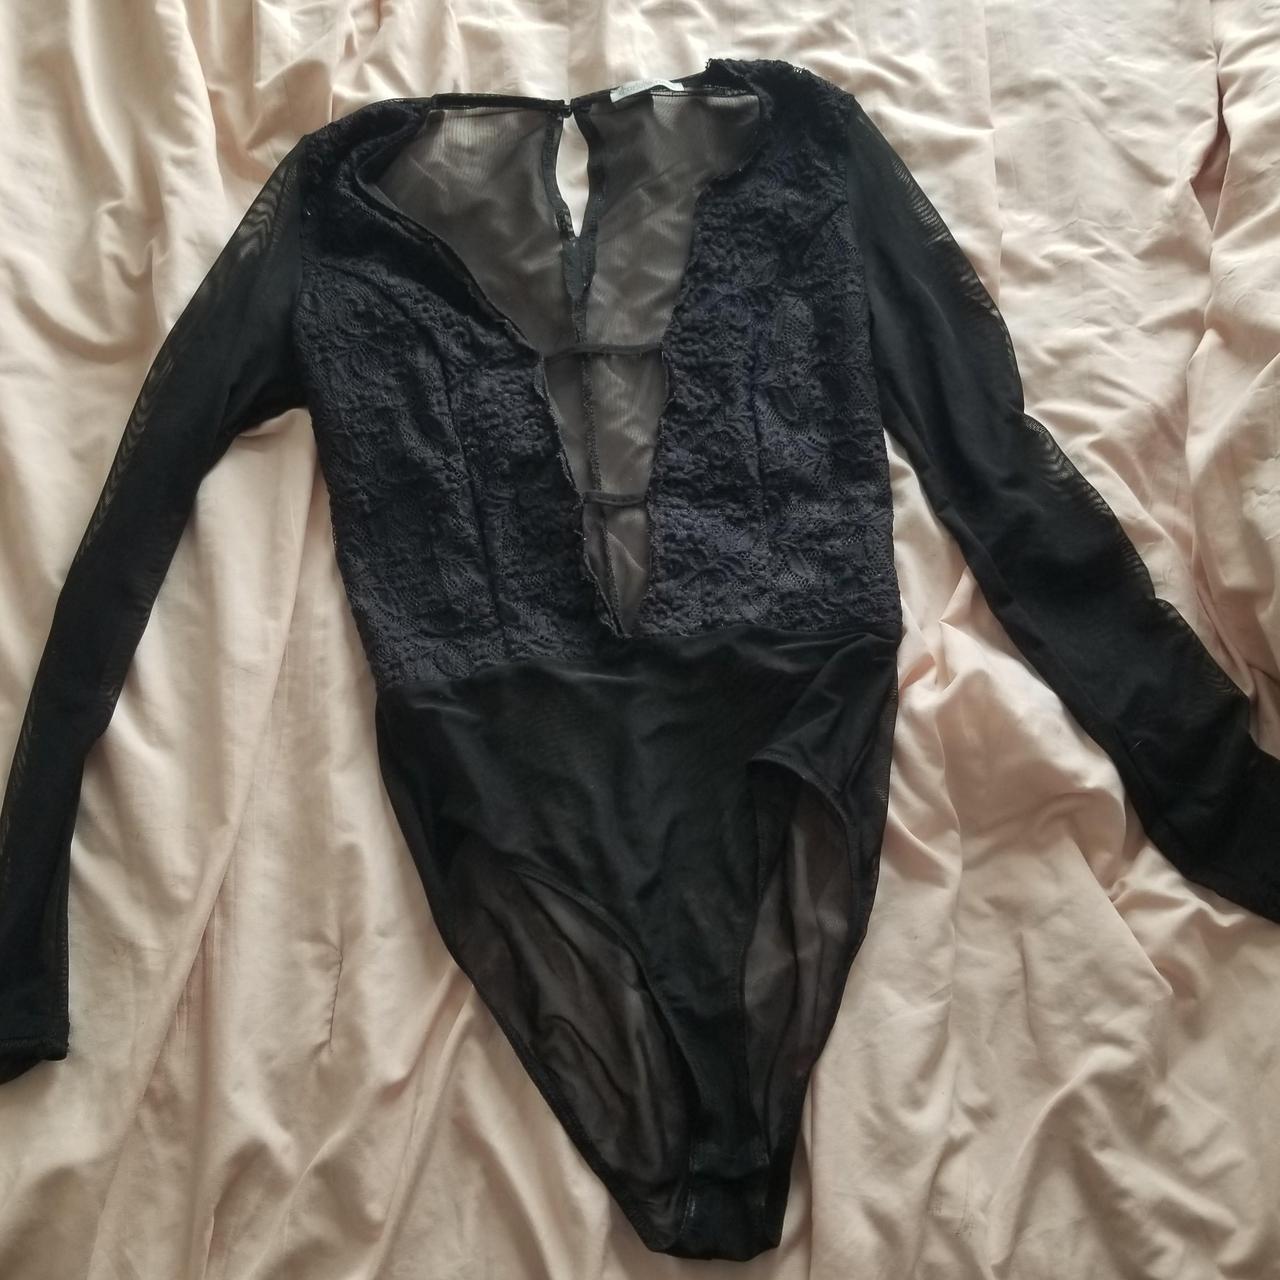 Small Black Lace + Mesh Bodysuit from Charlotte... - Depop